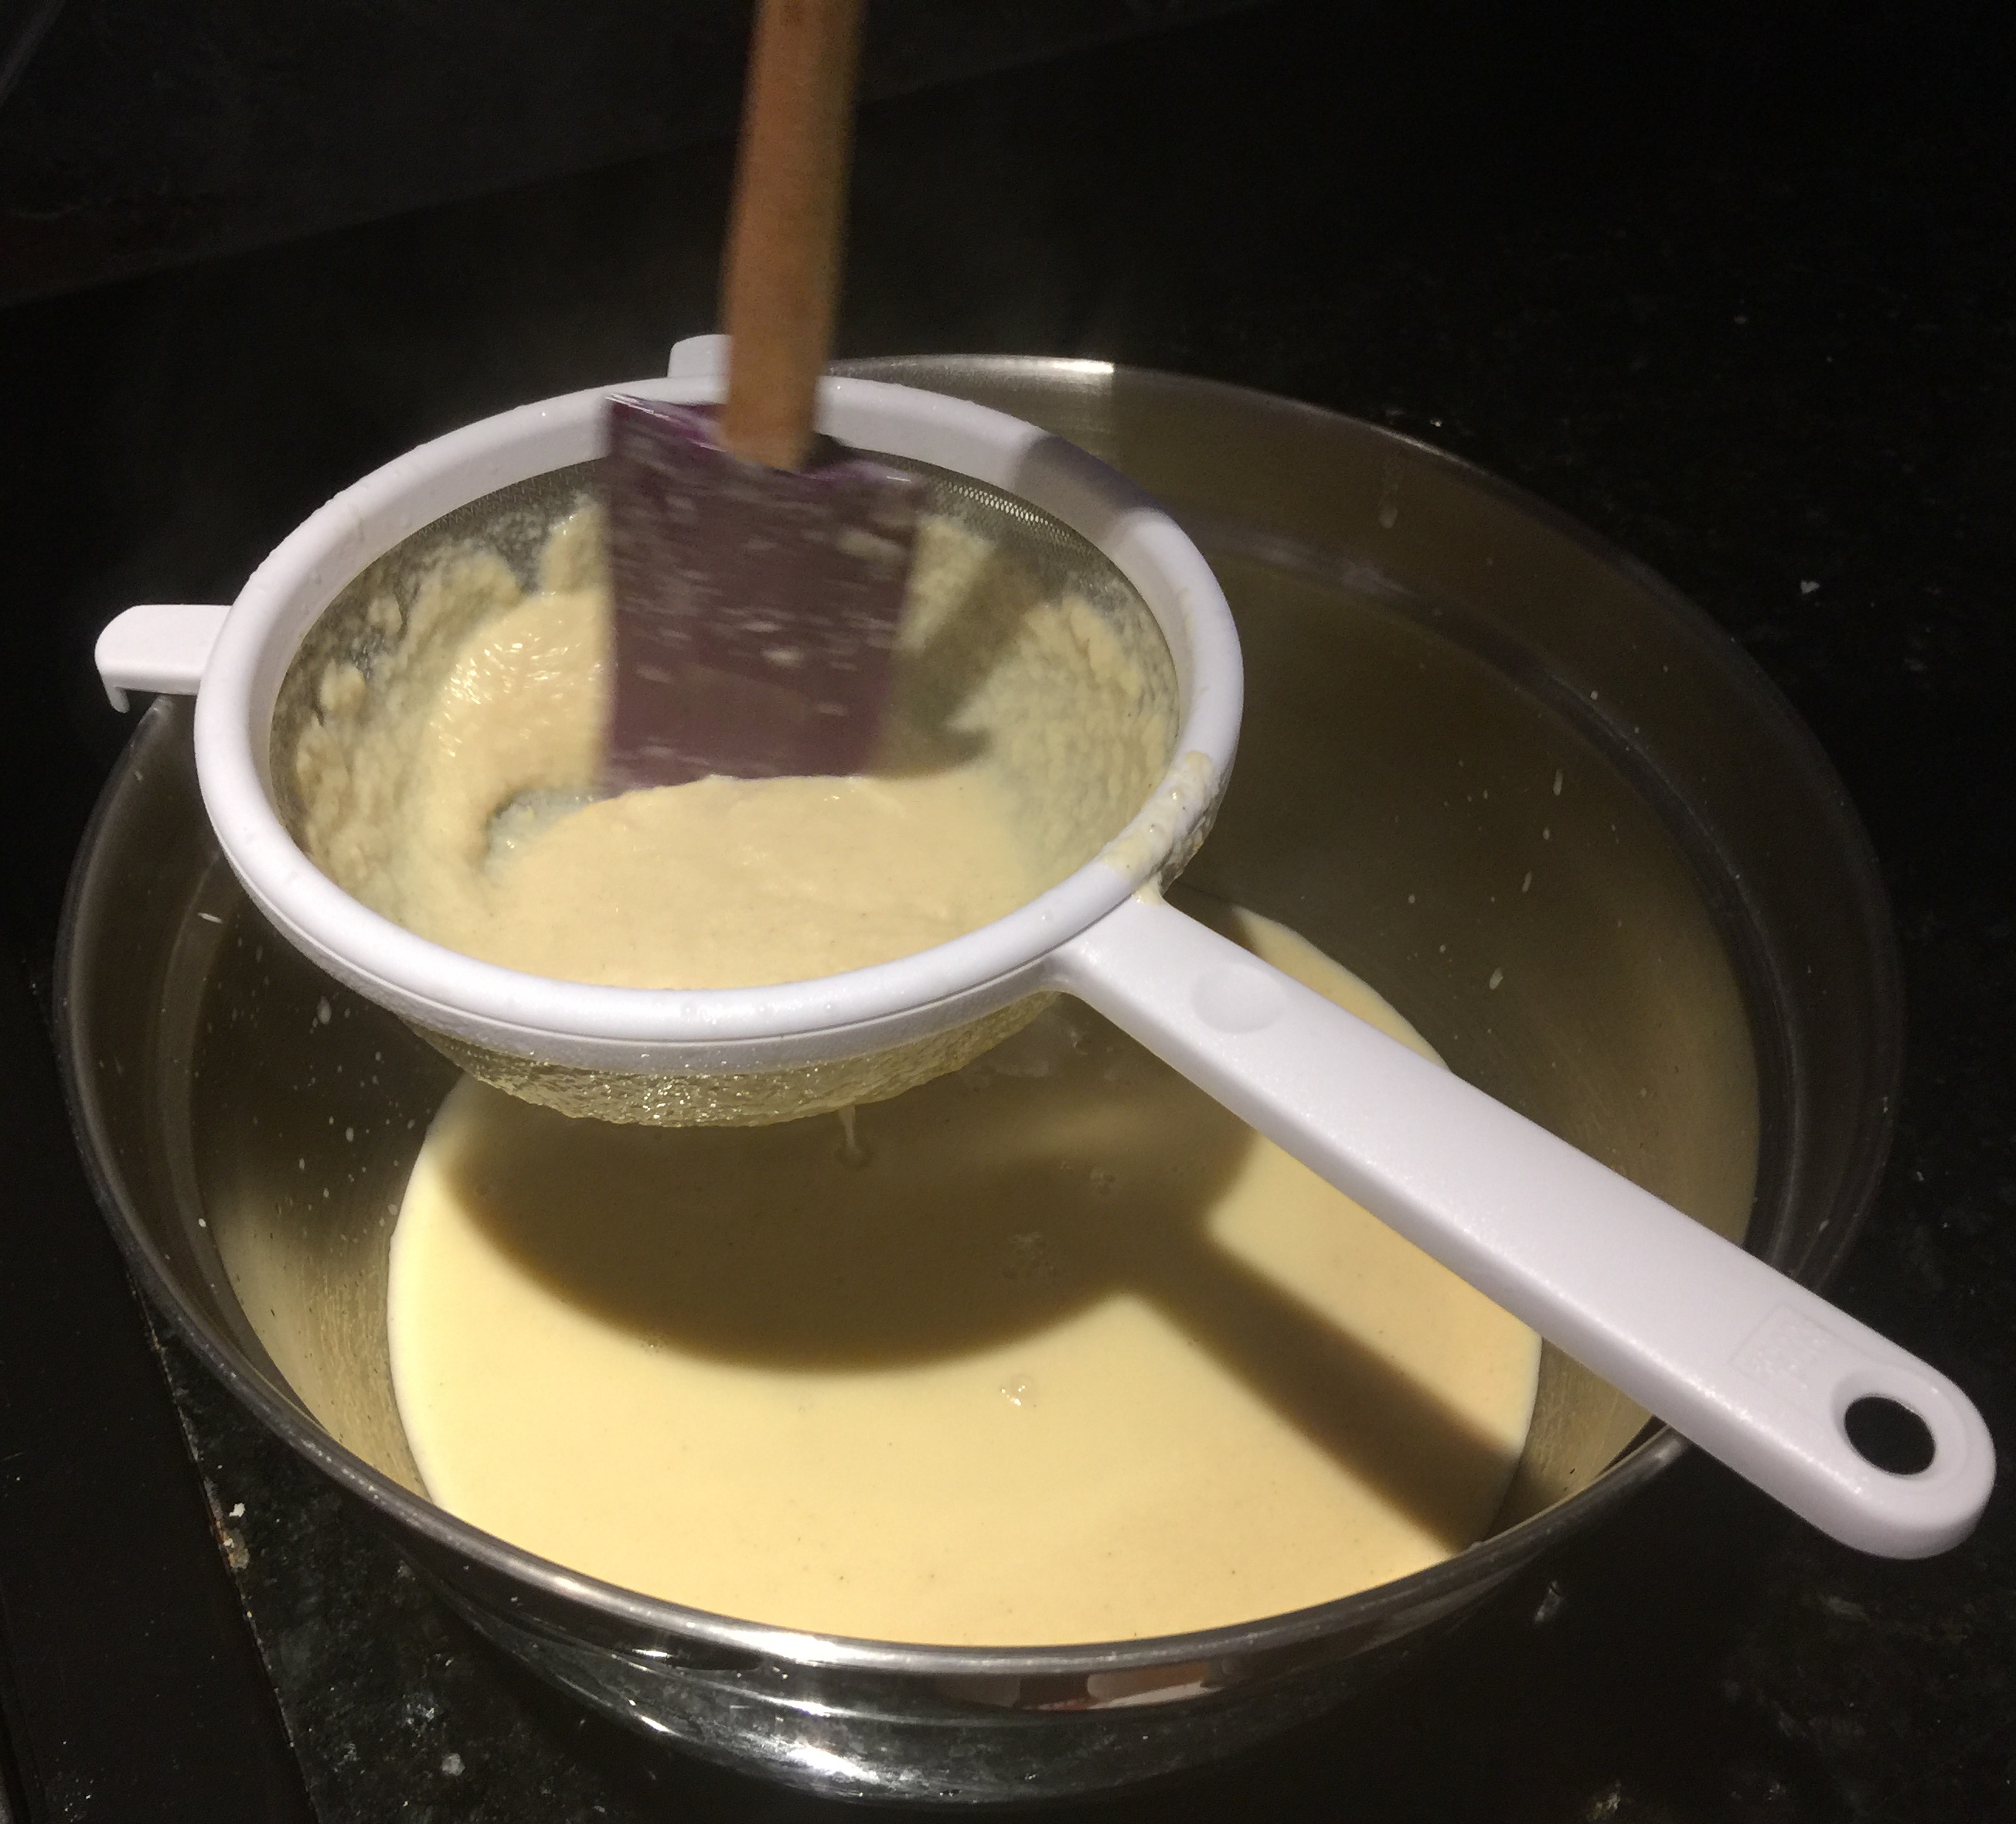 Strain Out the Milk Fats in the Ice Cream